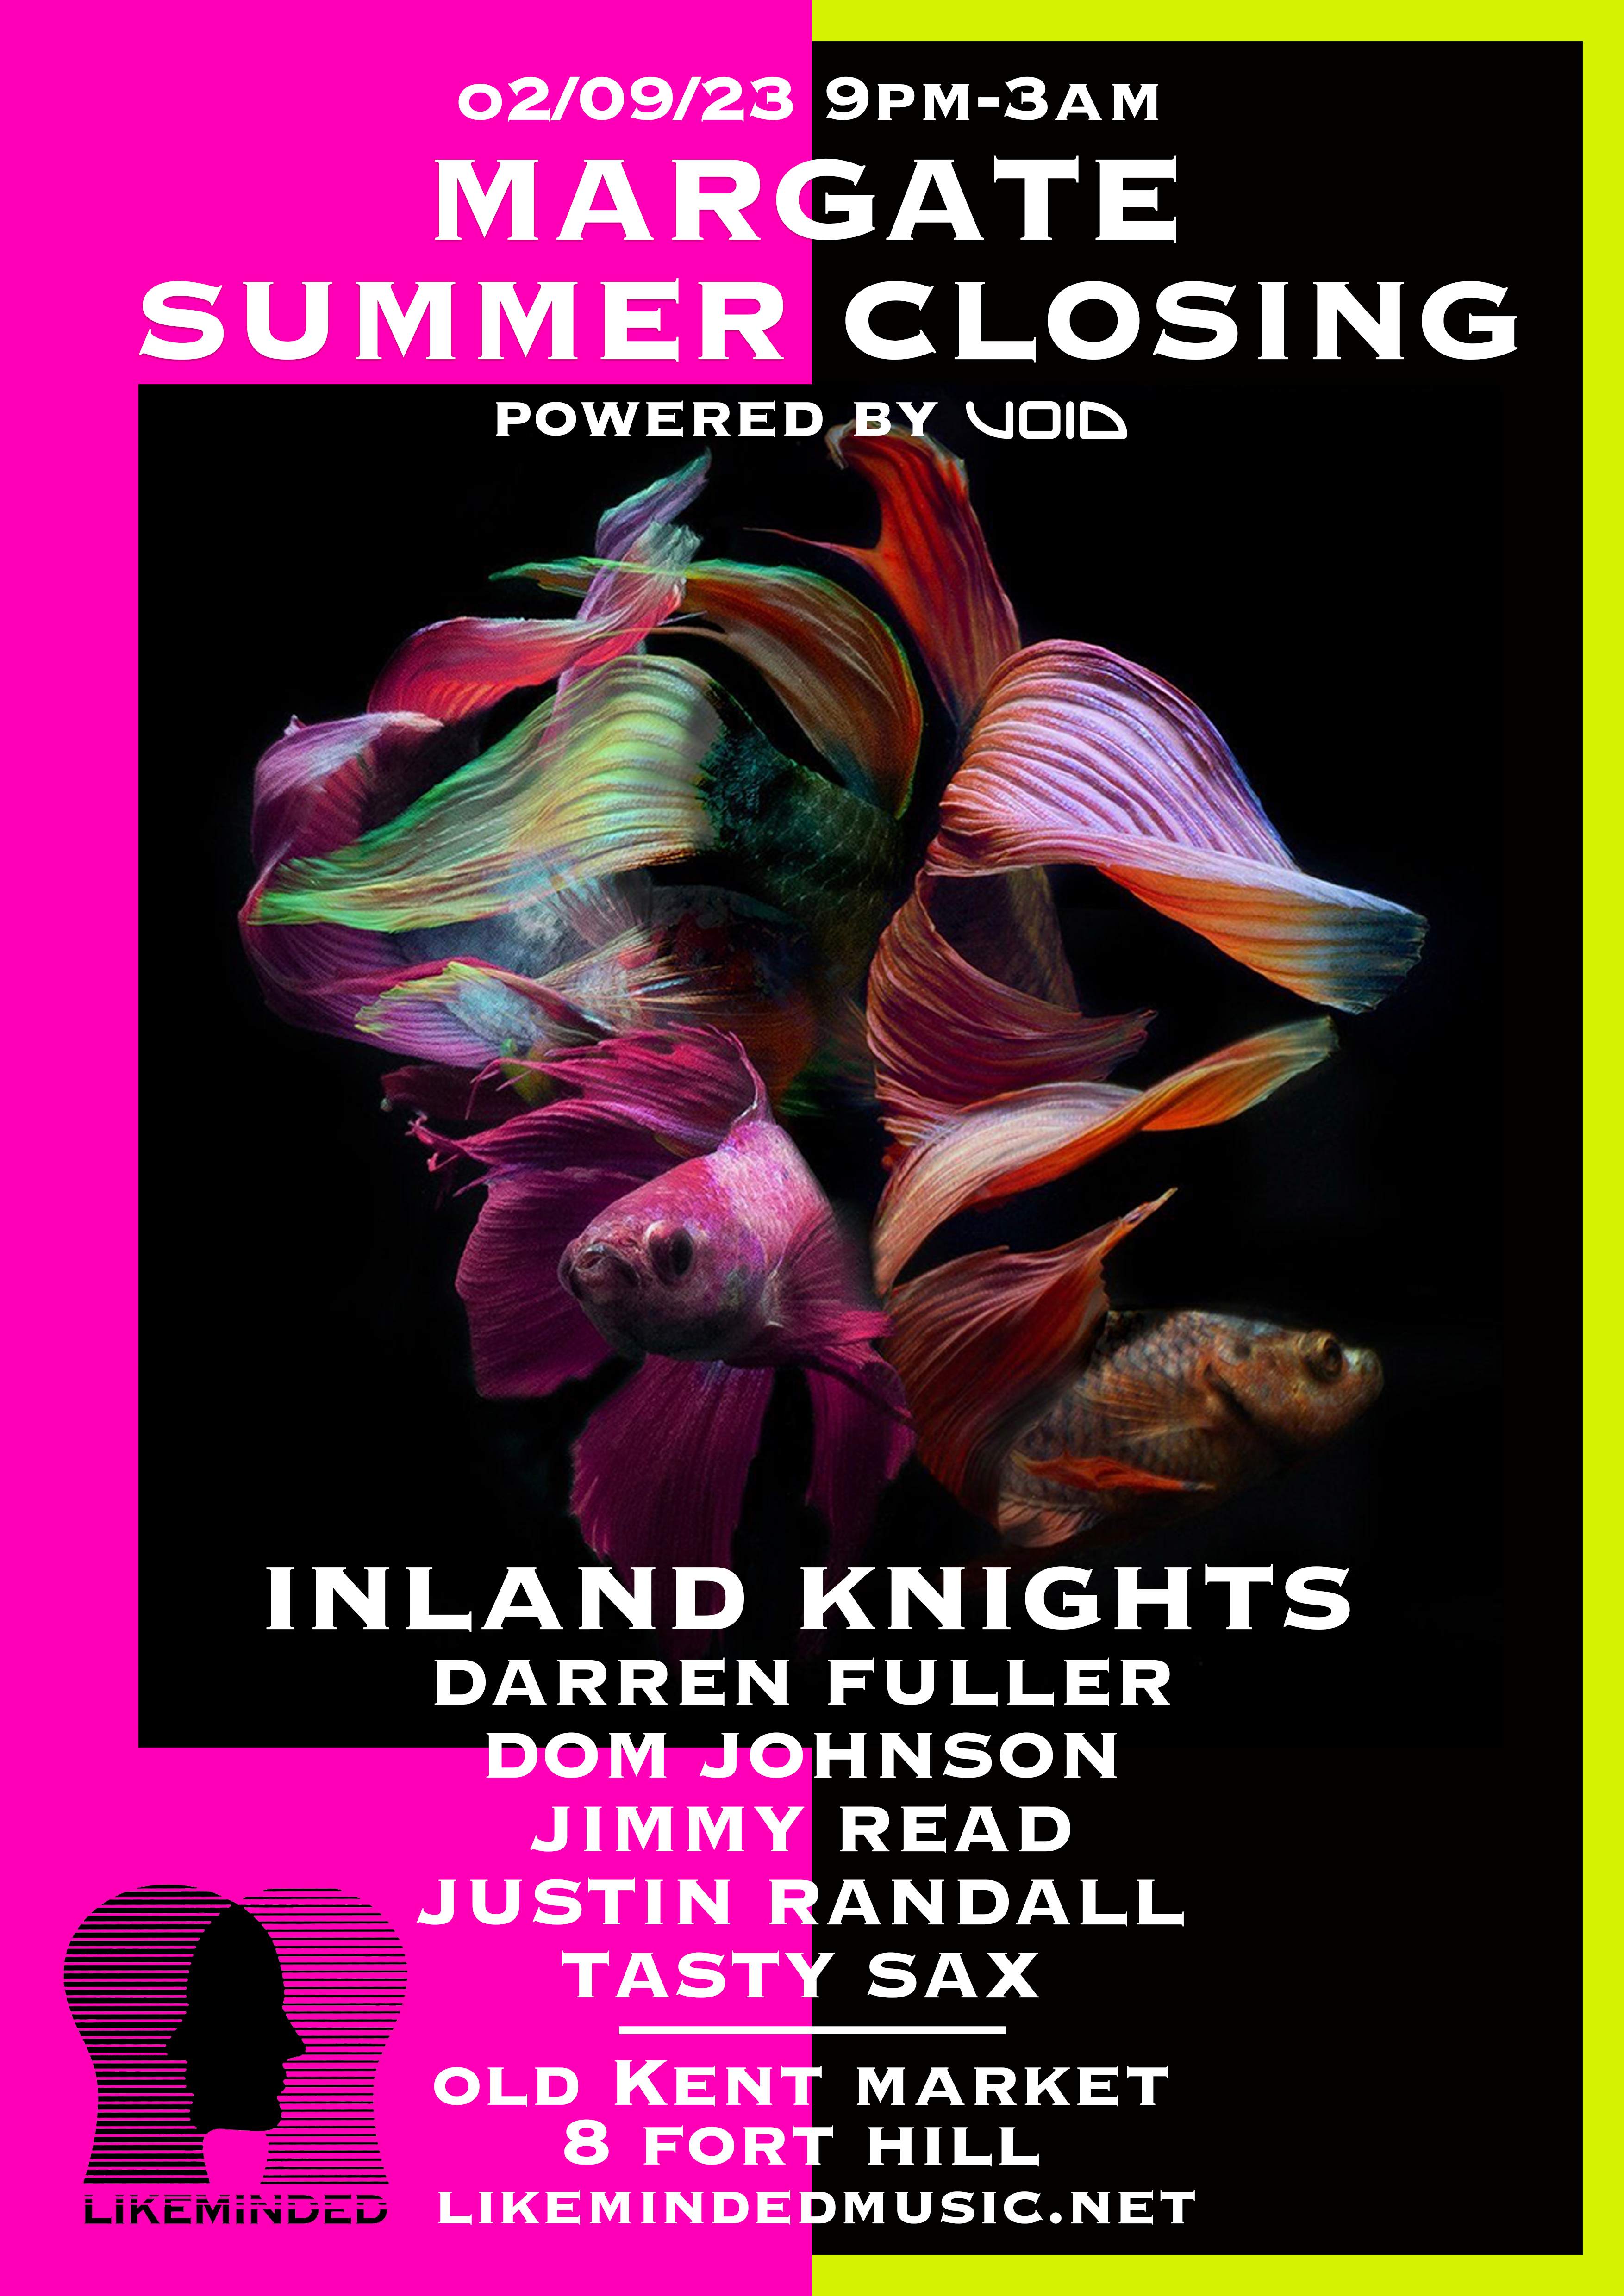 [CANCELLED] Margate Summer Closing Party with Inland Knights - フライヤー表